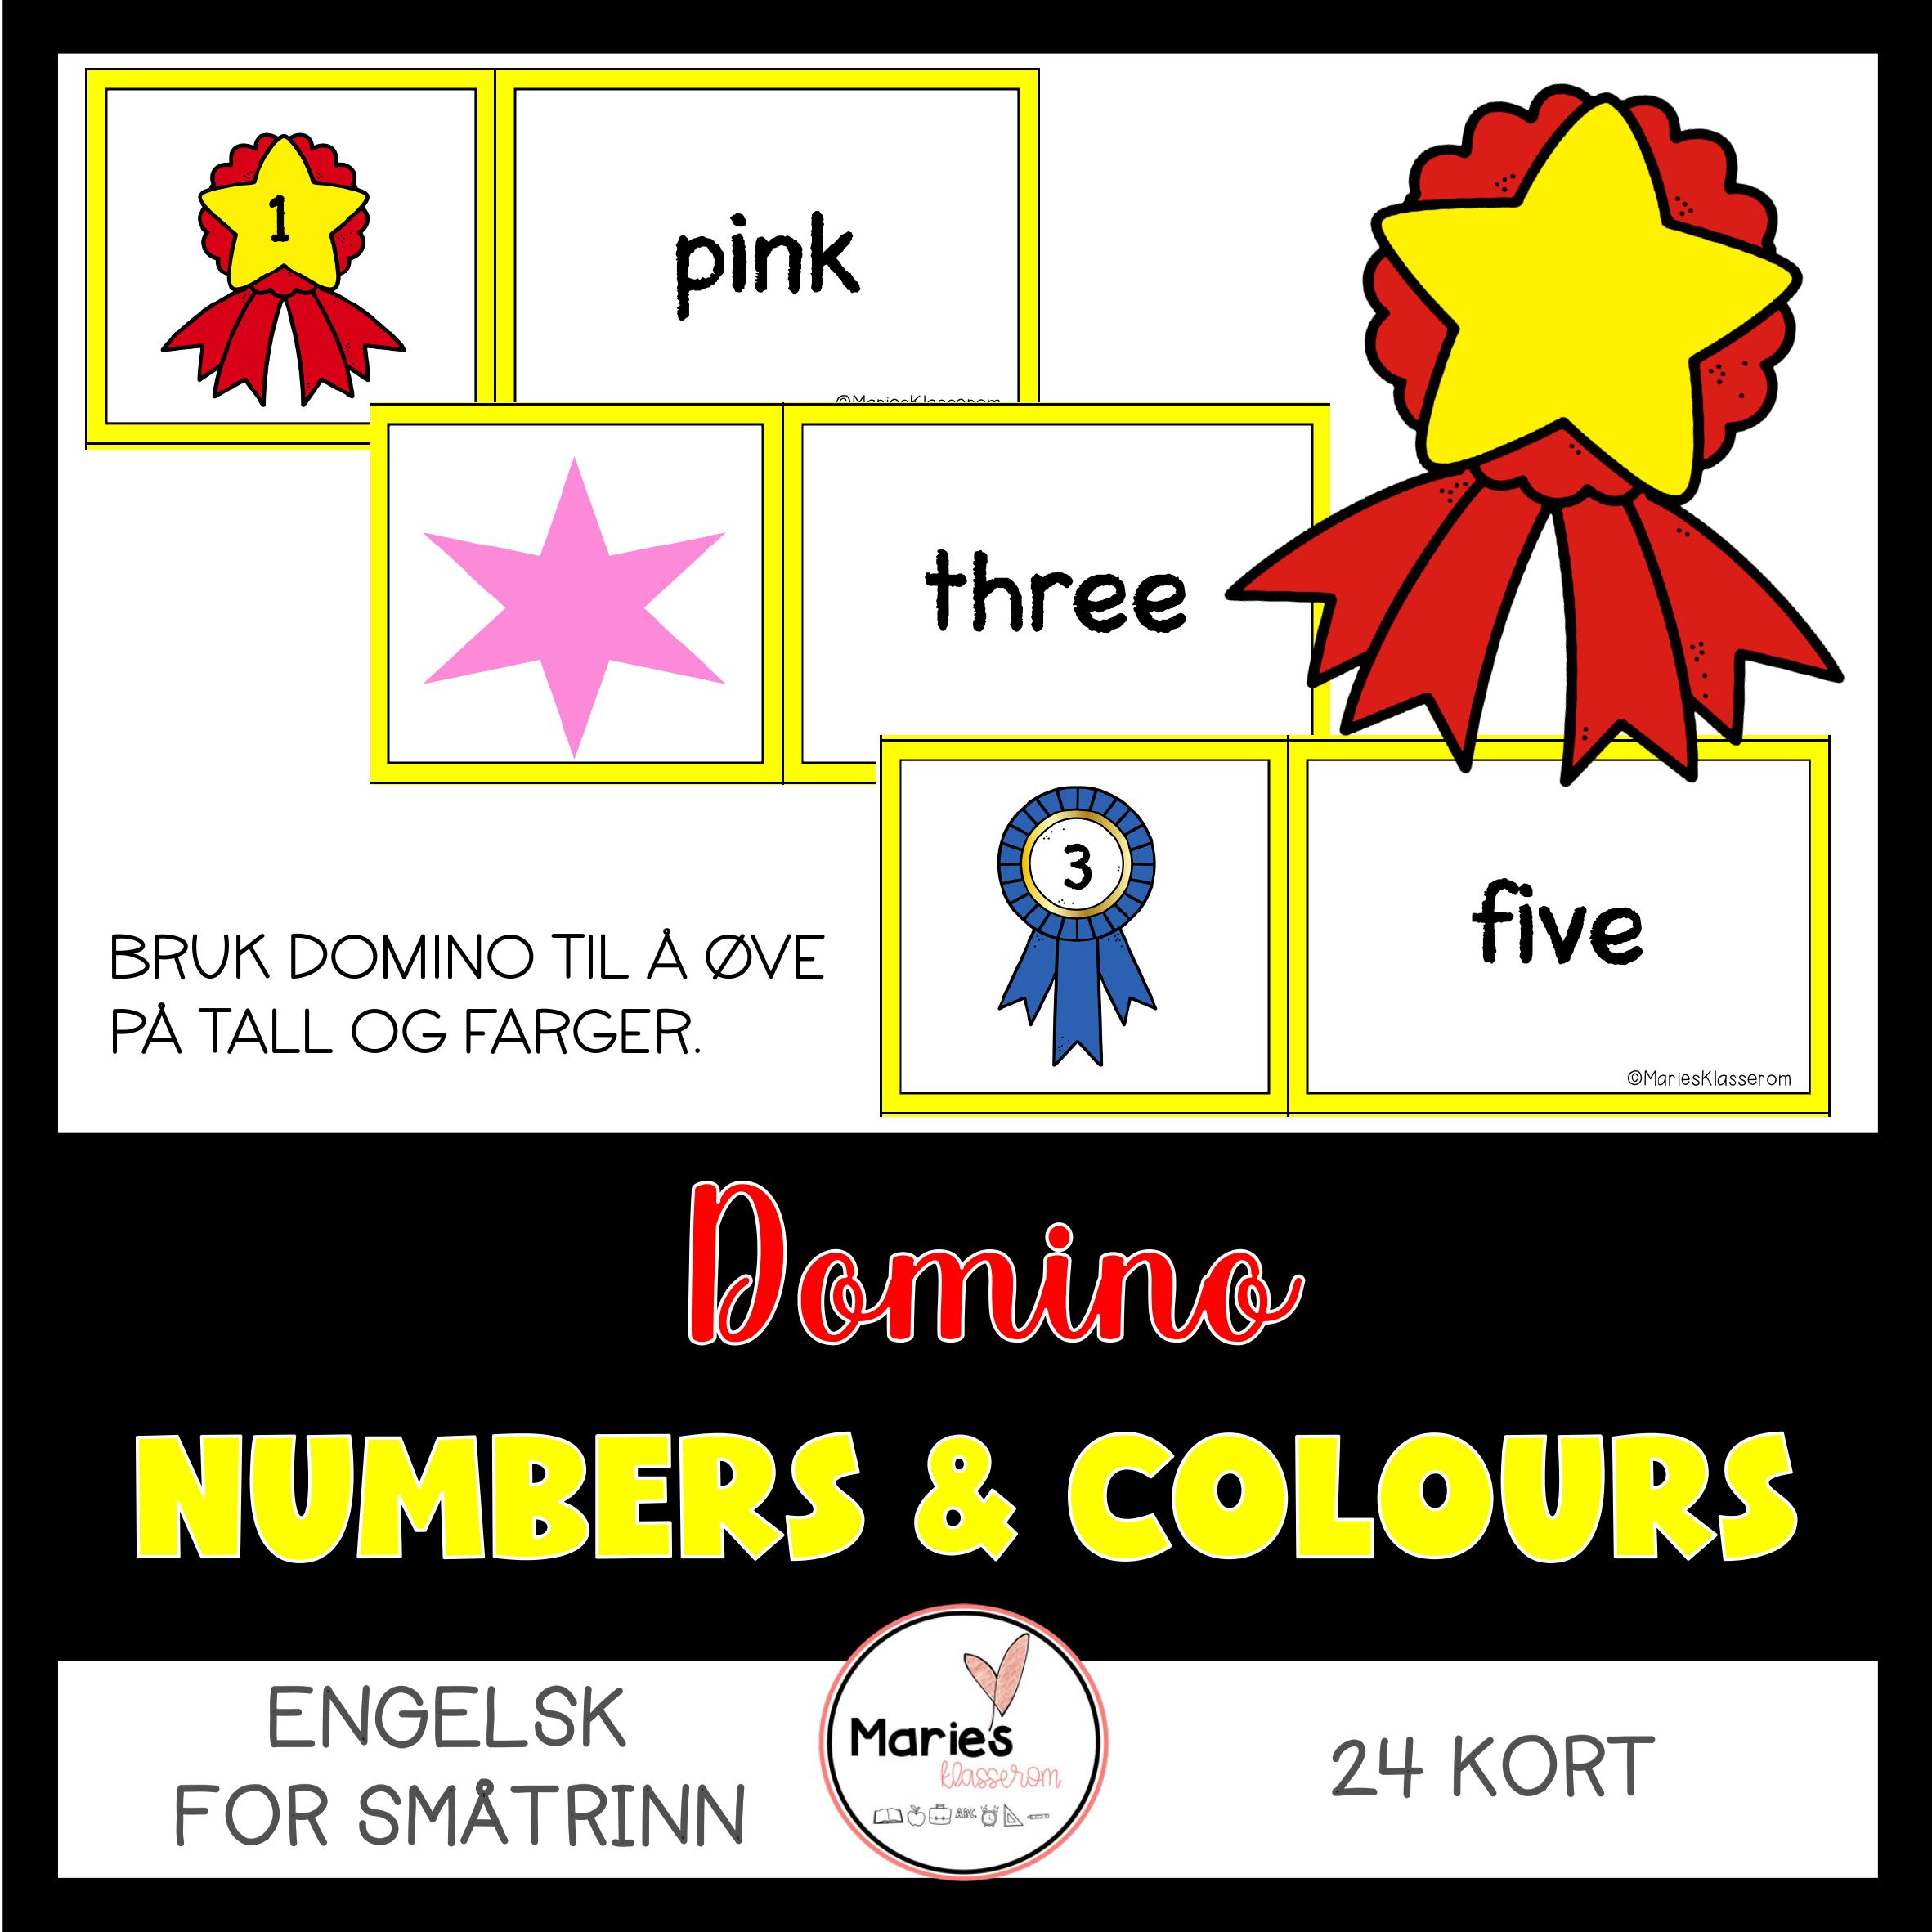 NUMBERS AND COLOURS domino